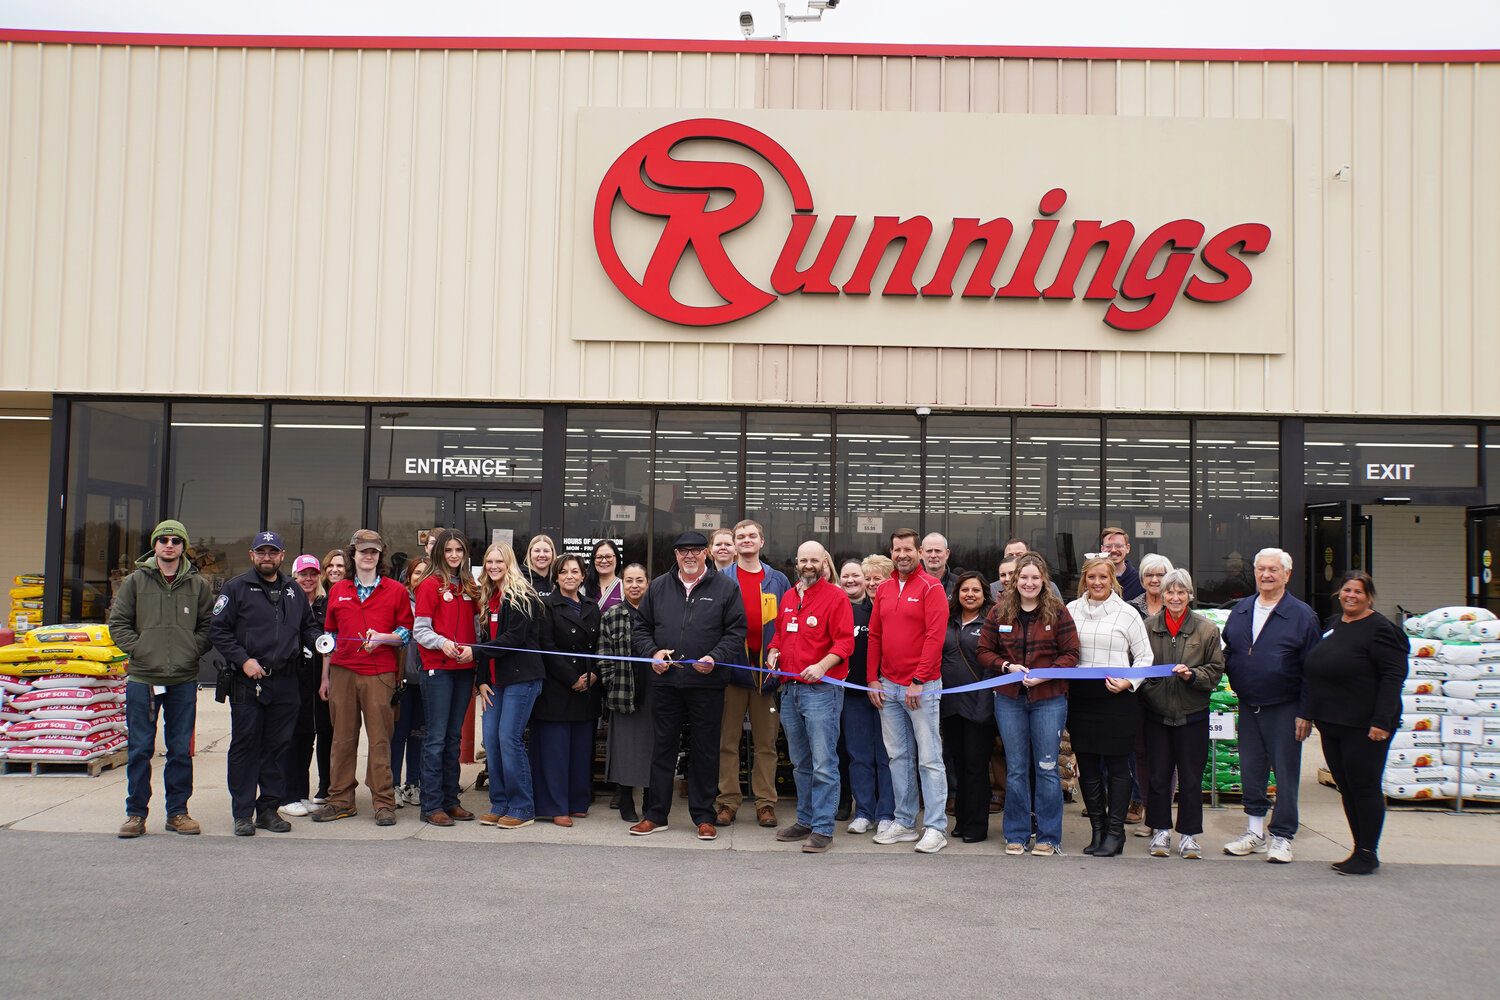 On Thursday, March 21, a ribbon cutting ceremony and grand opening were held for Runnings at 1240 N. 7th St. in Rochelle. 